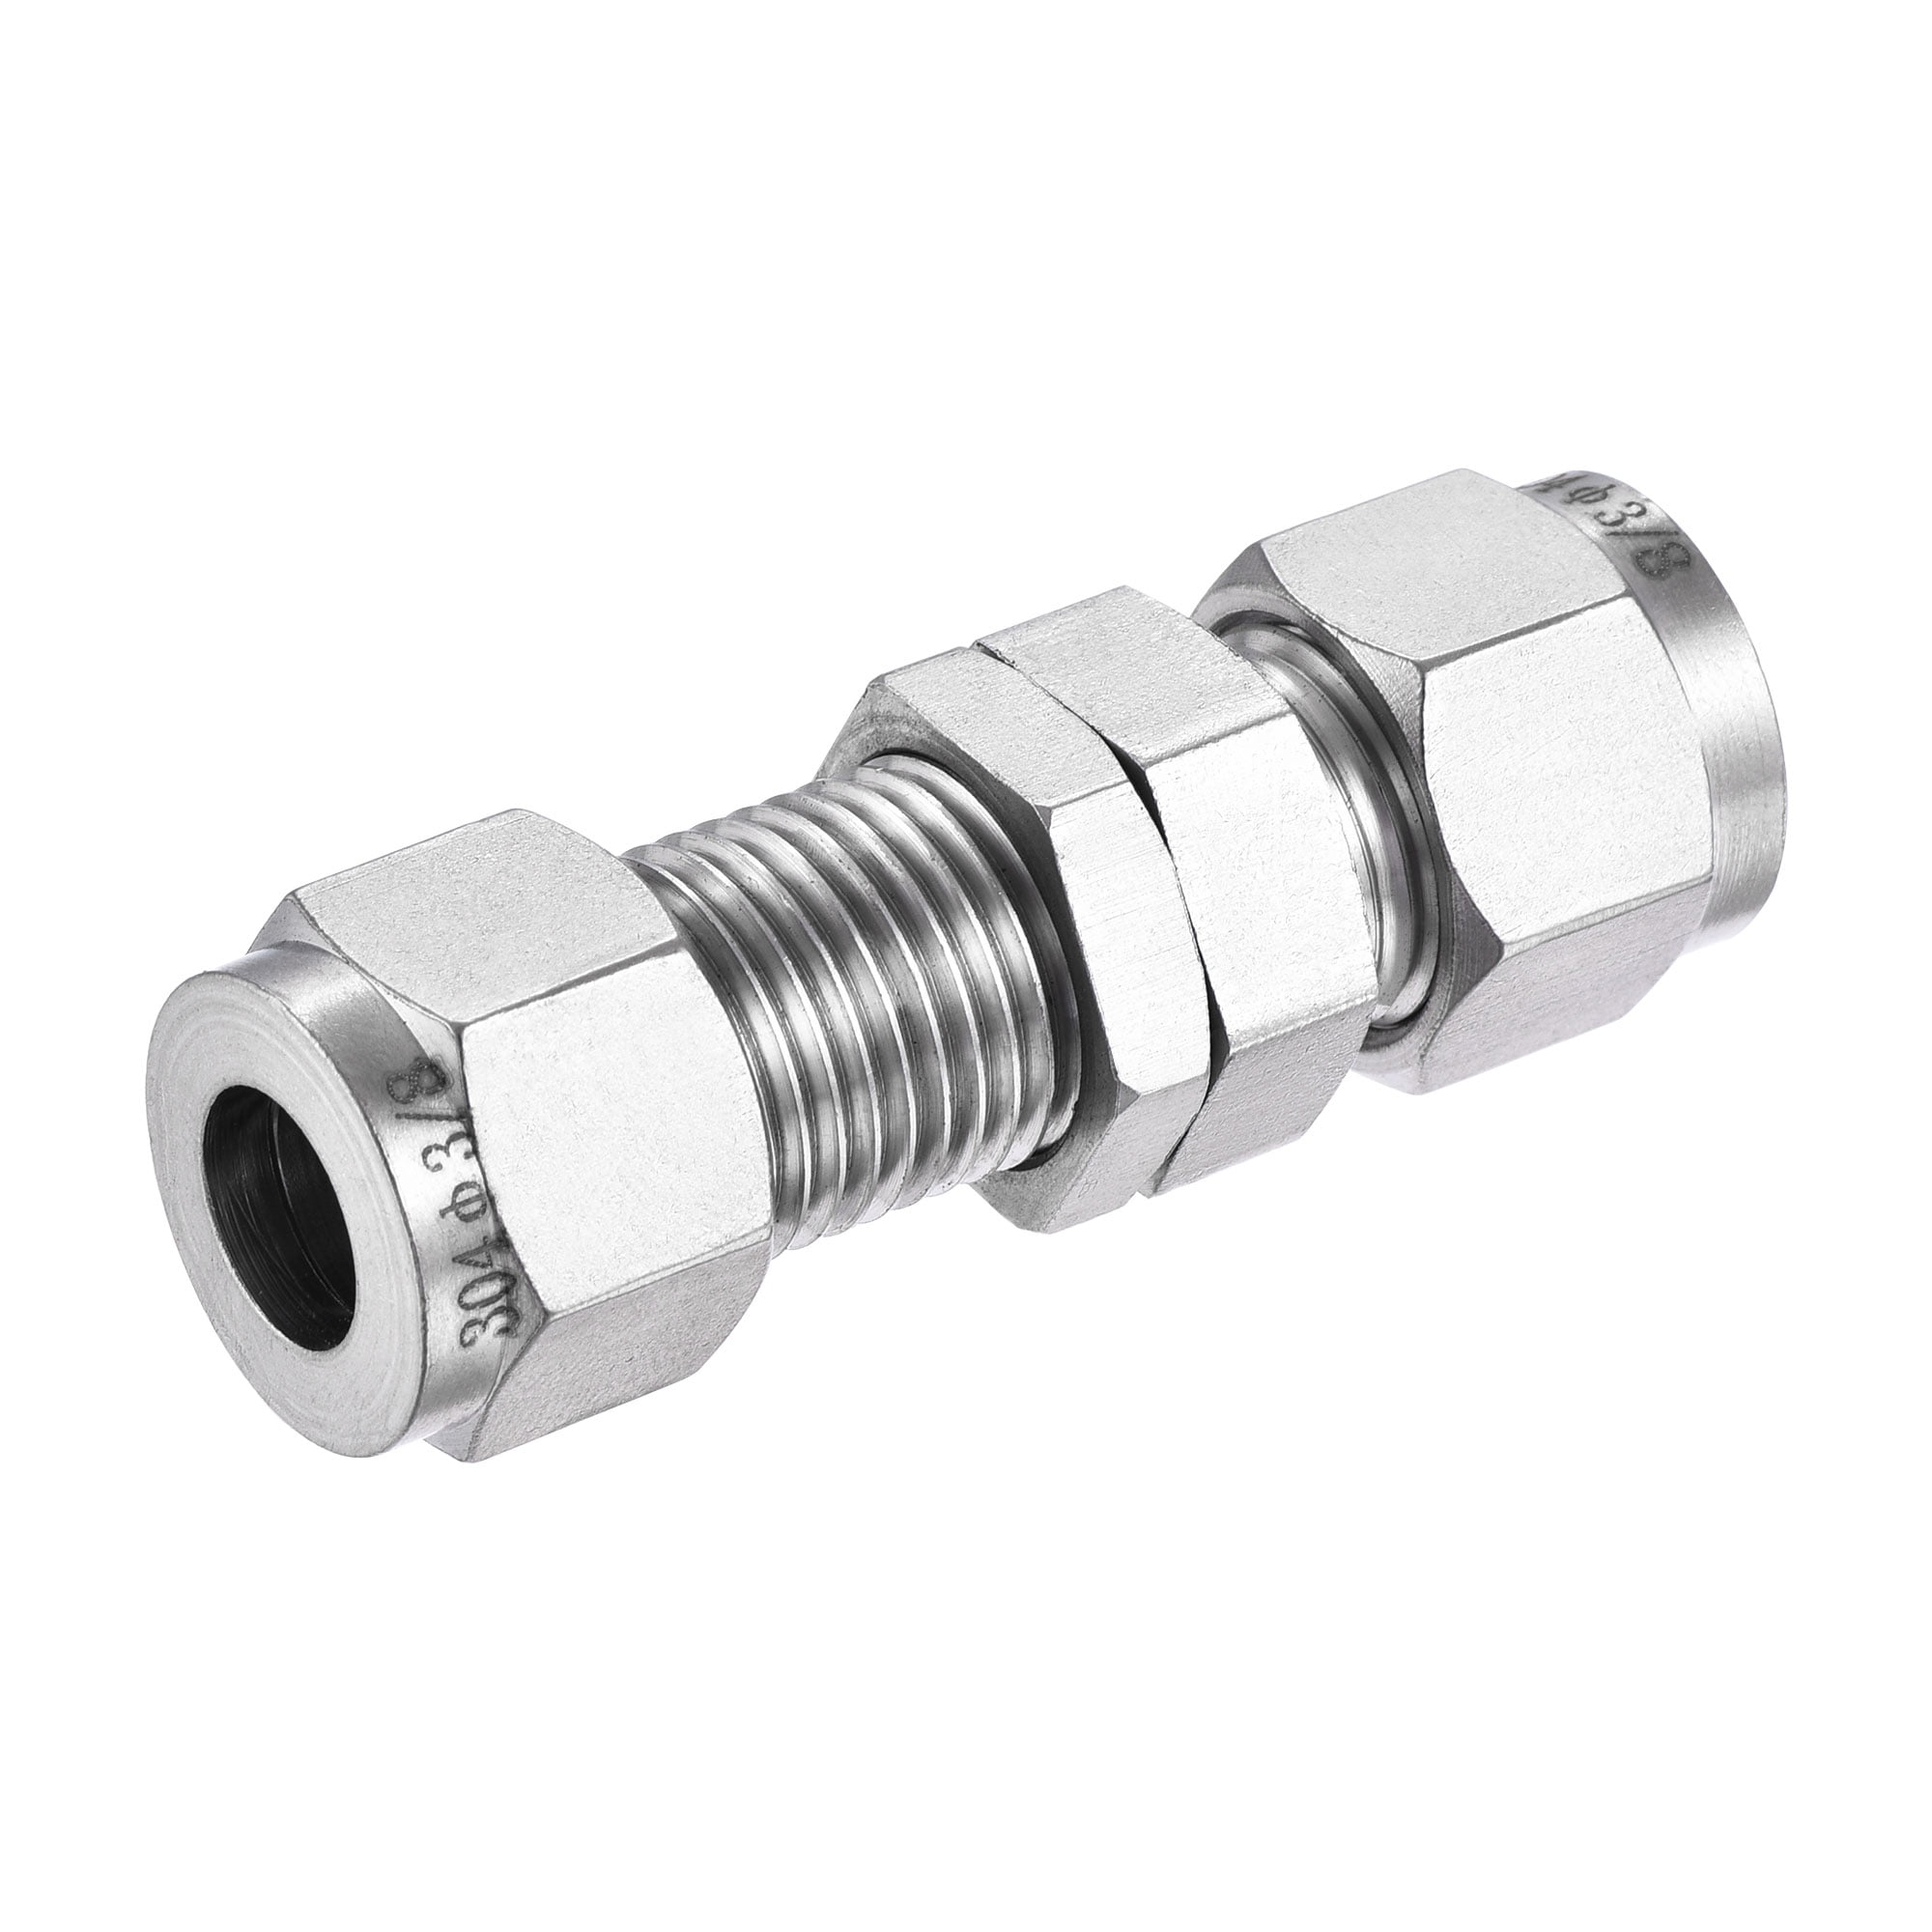 Fit 12mm Tube to 1/2" NPT Male 304 SS Pipe Compression fitting Union Connector 